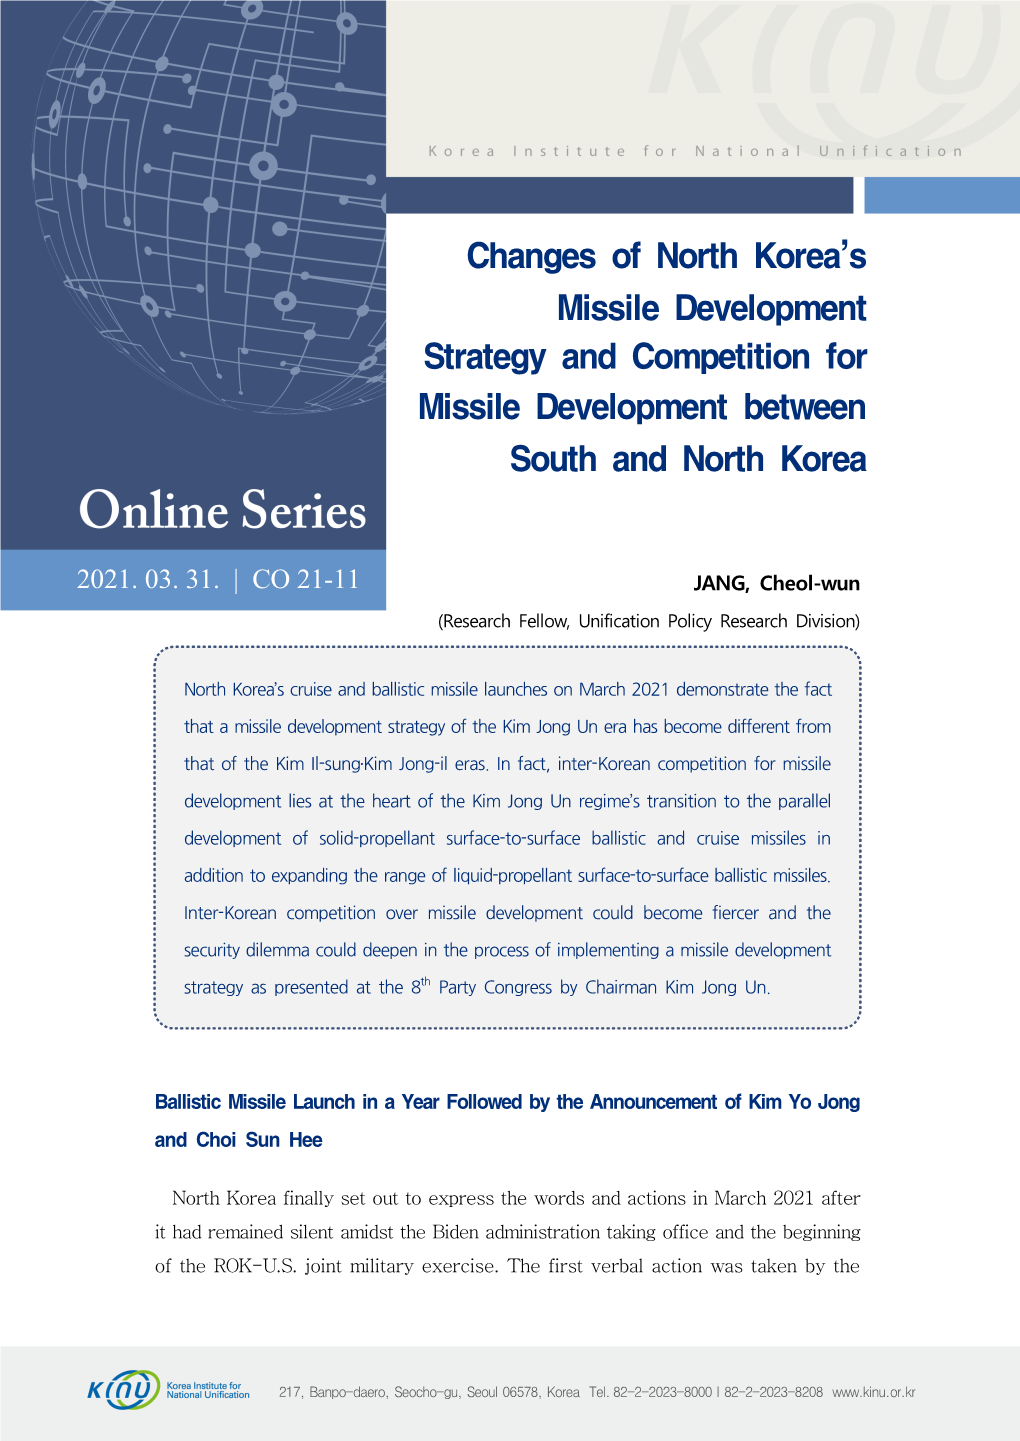 Changes of North Korea's Missile Development Strategy And